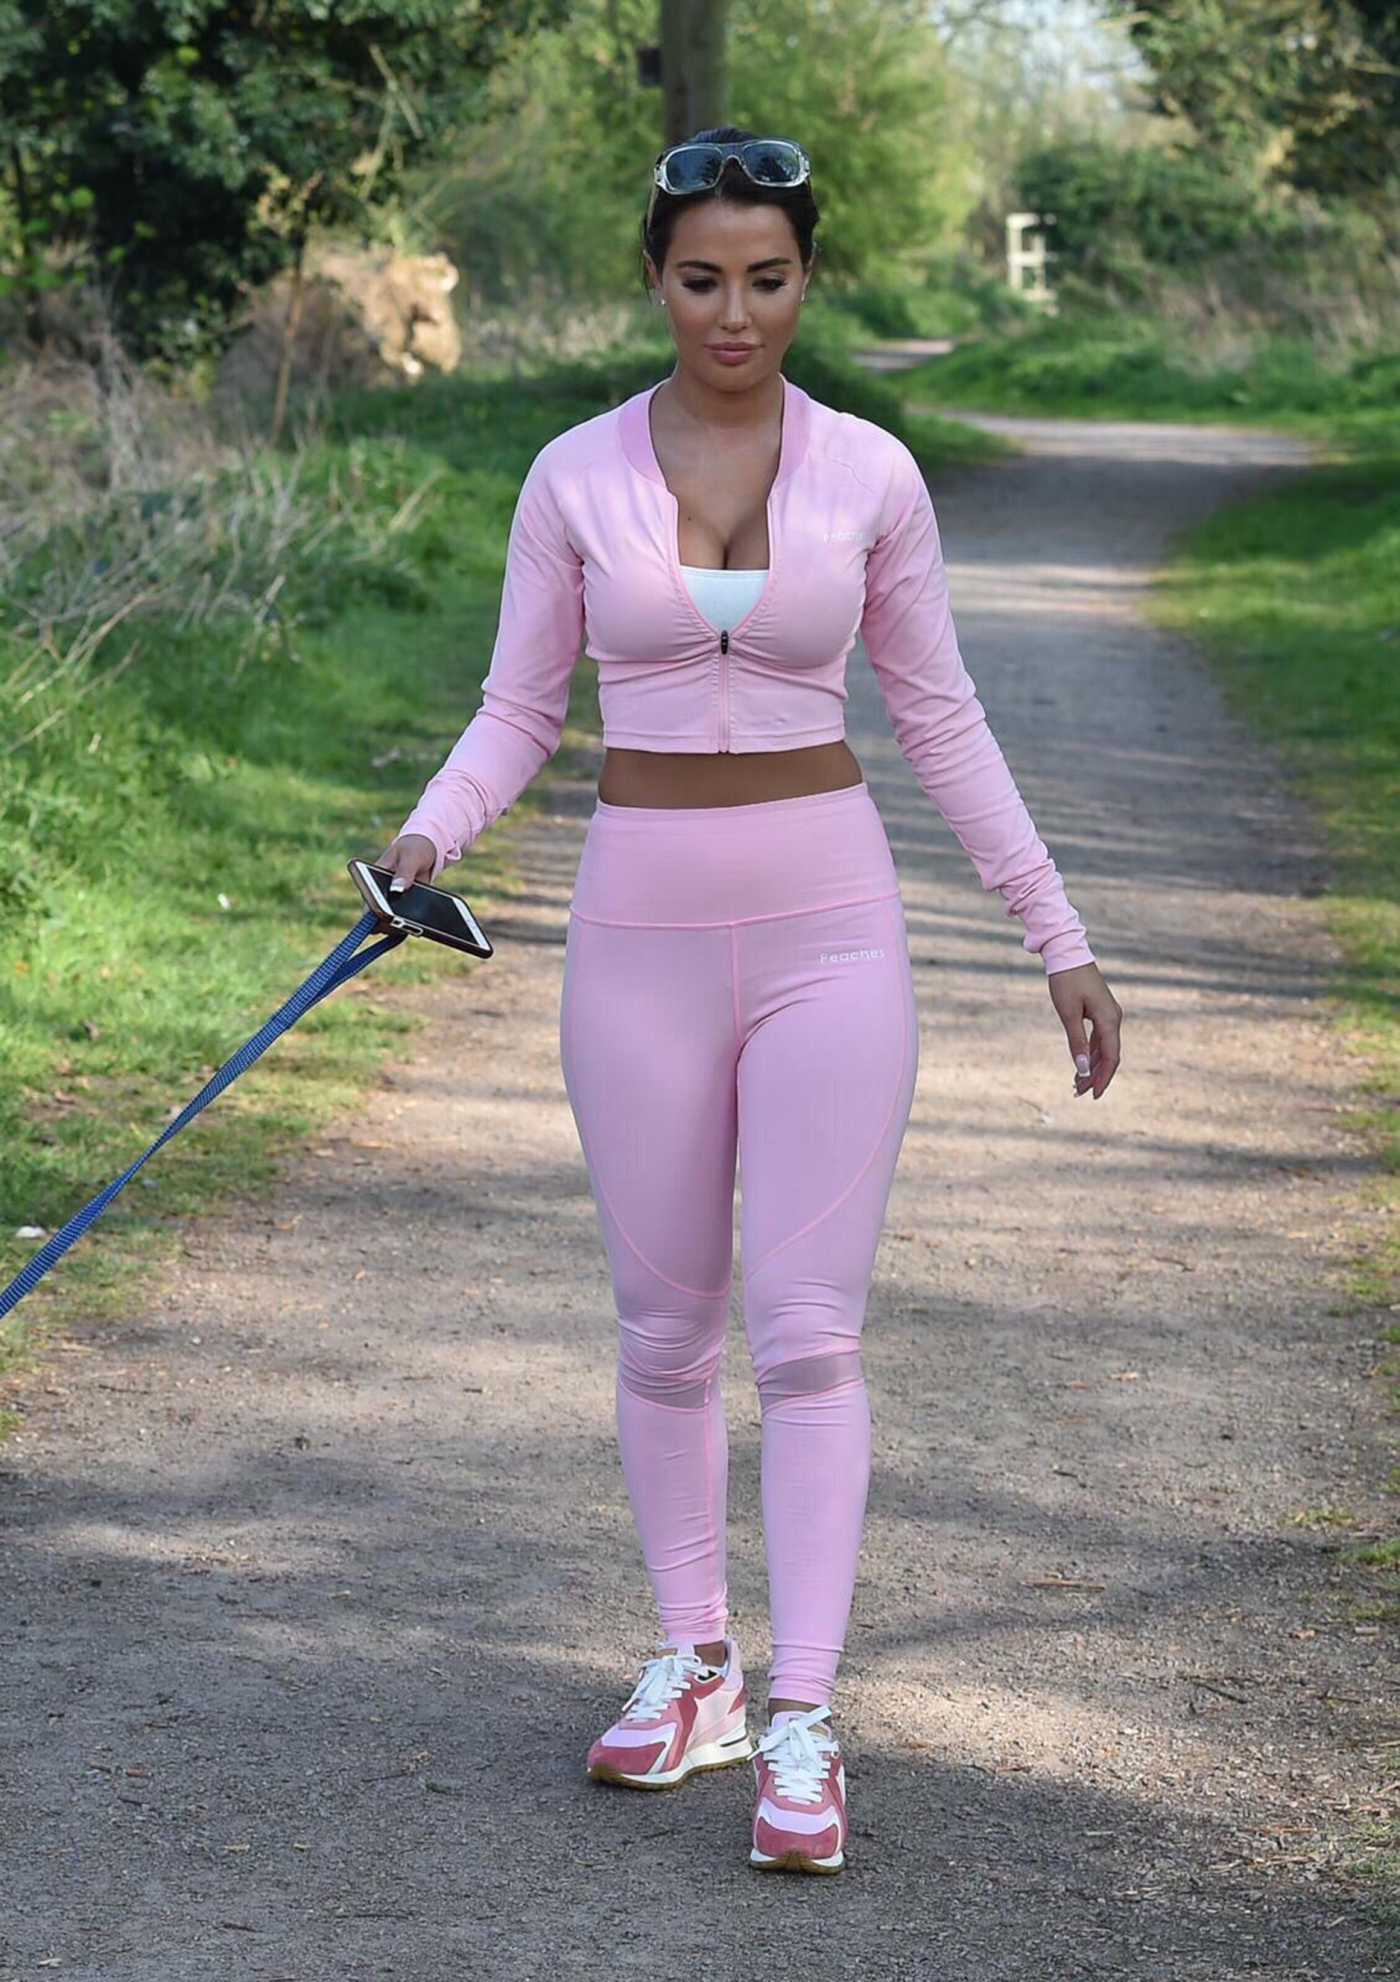 Yazmin Oukhellou in a Pink Workout Clothes Walks Her Dogs in Essex 05/02/2020